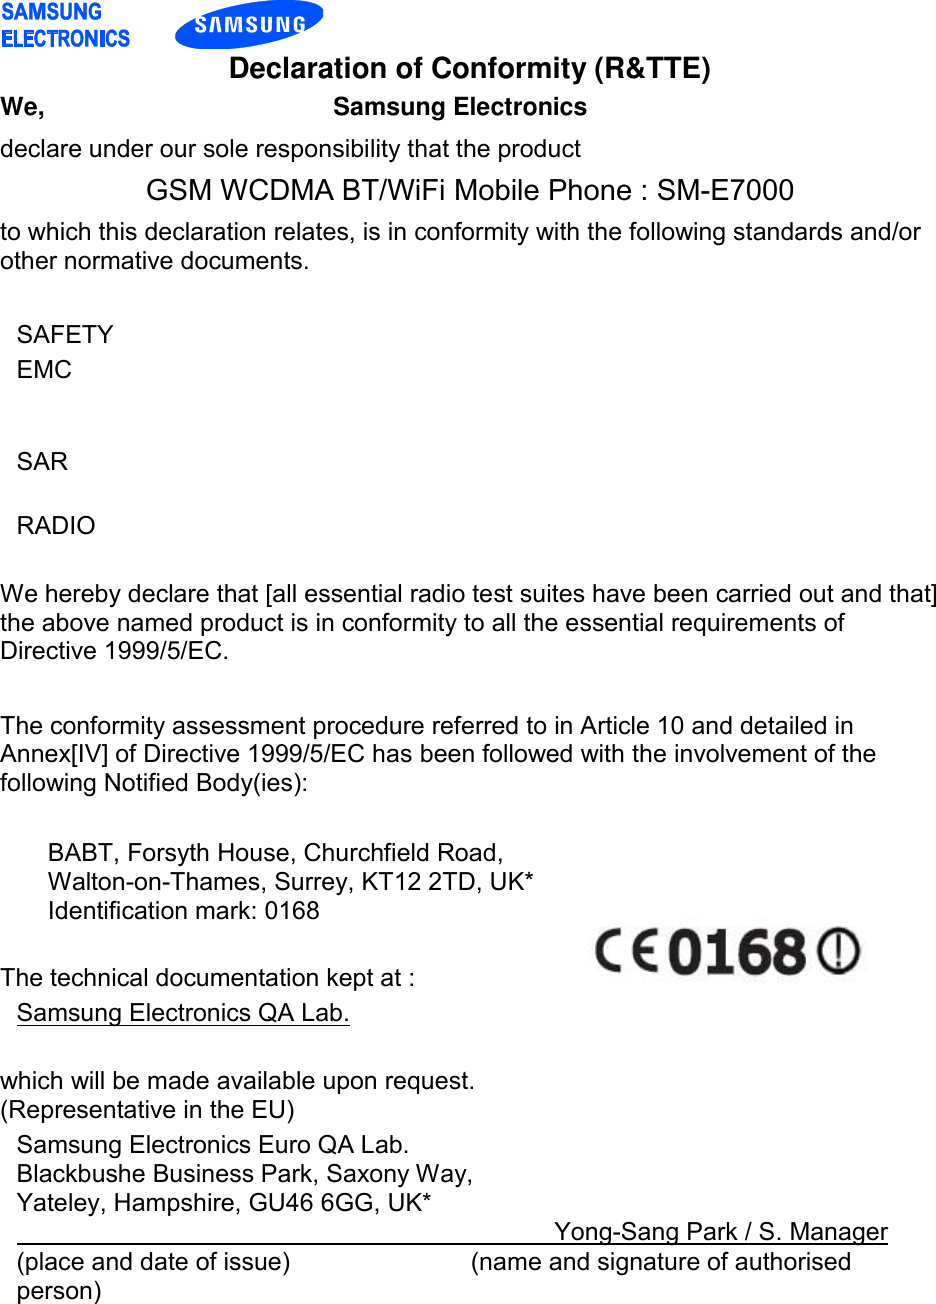    Declaration of Conformity (R&amp;TTE) We,                      Samsung Electronics declare under our sole responsibility that the product GSM WCDMA BT/WiFi Mobile Phone : SM-E7000 to which this declaration relates, is in conformity with the following standards and/or other normative documents.  SAFETY   EMC     SAR   RADIO    We hereby declare that [all essential radio test suites have been carried out and that] the above named product is in conformity to all the essential requirements of Directive 1999/5/EC.  The conformity assessment procedure referred to in Article 10 and detailed in Annex[IV] of Directive 1999/5/EC has been followed with the involvement of the following Notified Body(ies):  BABT, Forsyth House, Churchfield Road,                           Walton-on-Thames, Surrey, KT12 2TD, UK* Identification mark: 0168  The technical documentation kept at : Samsung Electronics QA Lab.  which will be made available upon request. (Representative in the EU) Samsung Electronics Euro QA Lab. Blackbushe Business Park, Saxony Way, Yateley, Hampshire, GU46 6GG, UK*                                    Yong-Sang Park / S. Manager (place and date of issue)             (name and signature of authorised person)  